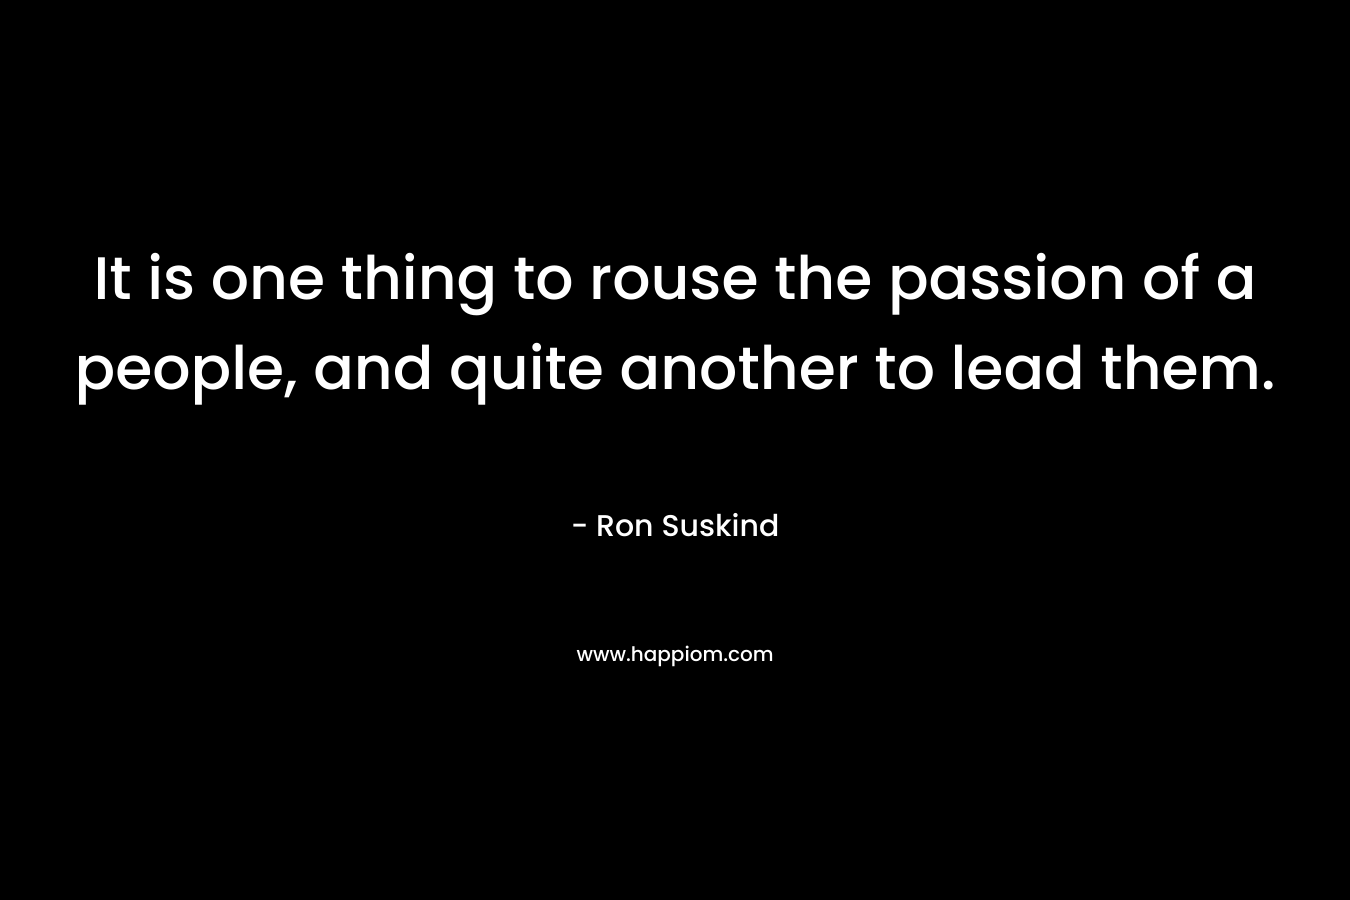 It is one thing to rouse the passion of a people, and quite another to lead them. – Ron Suskind